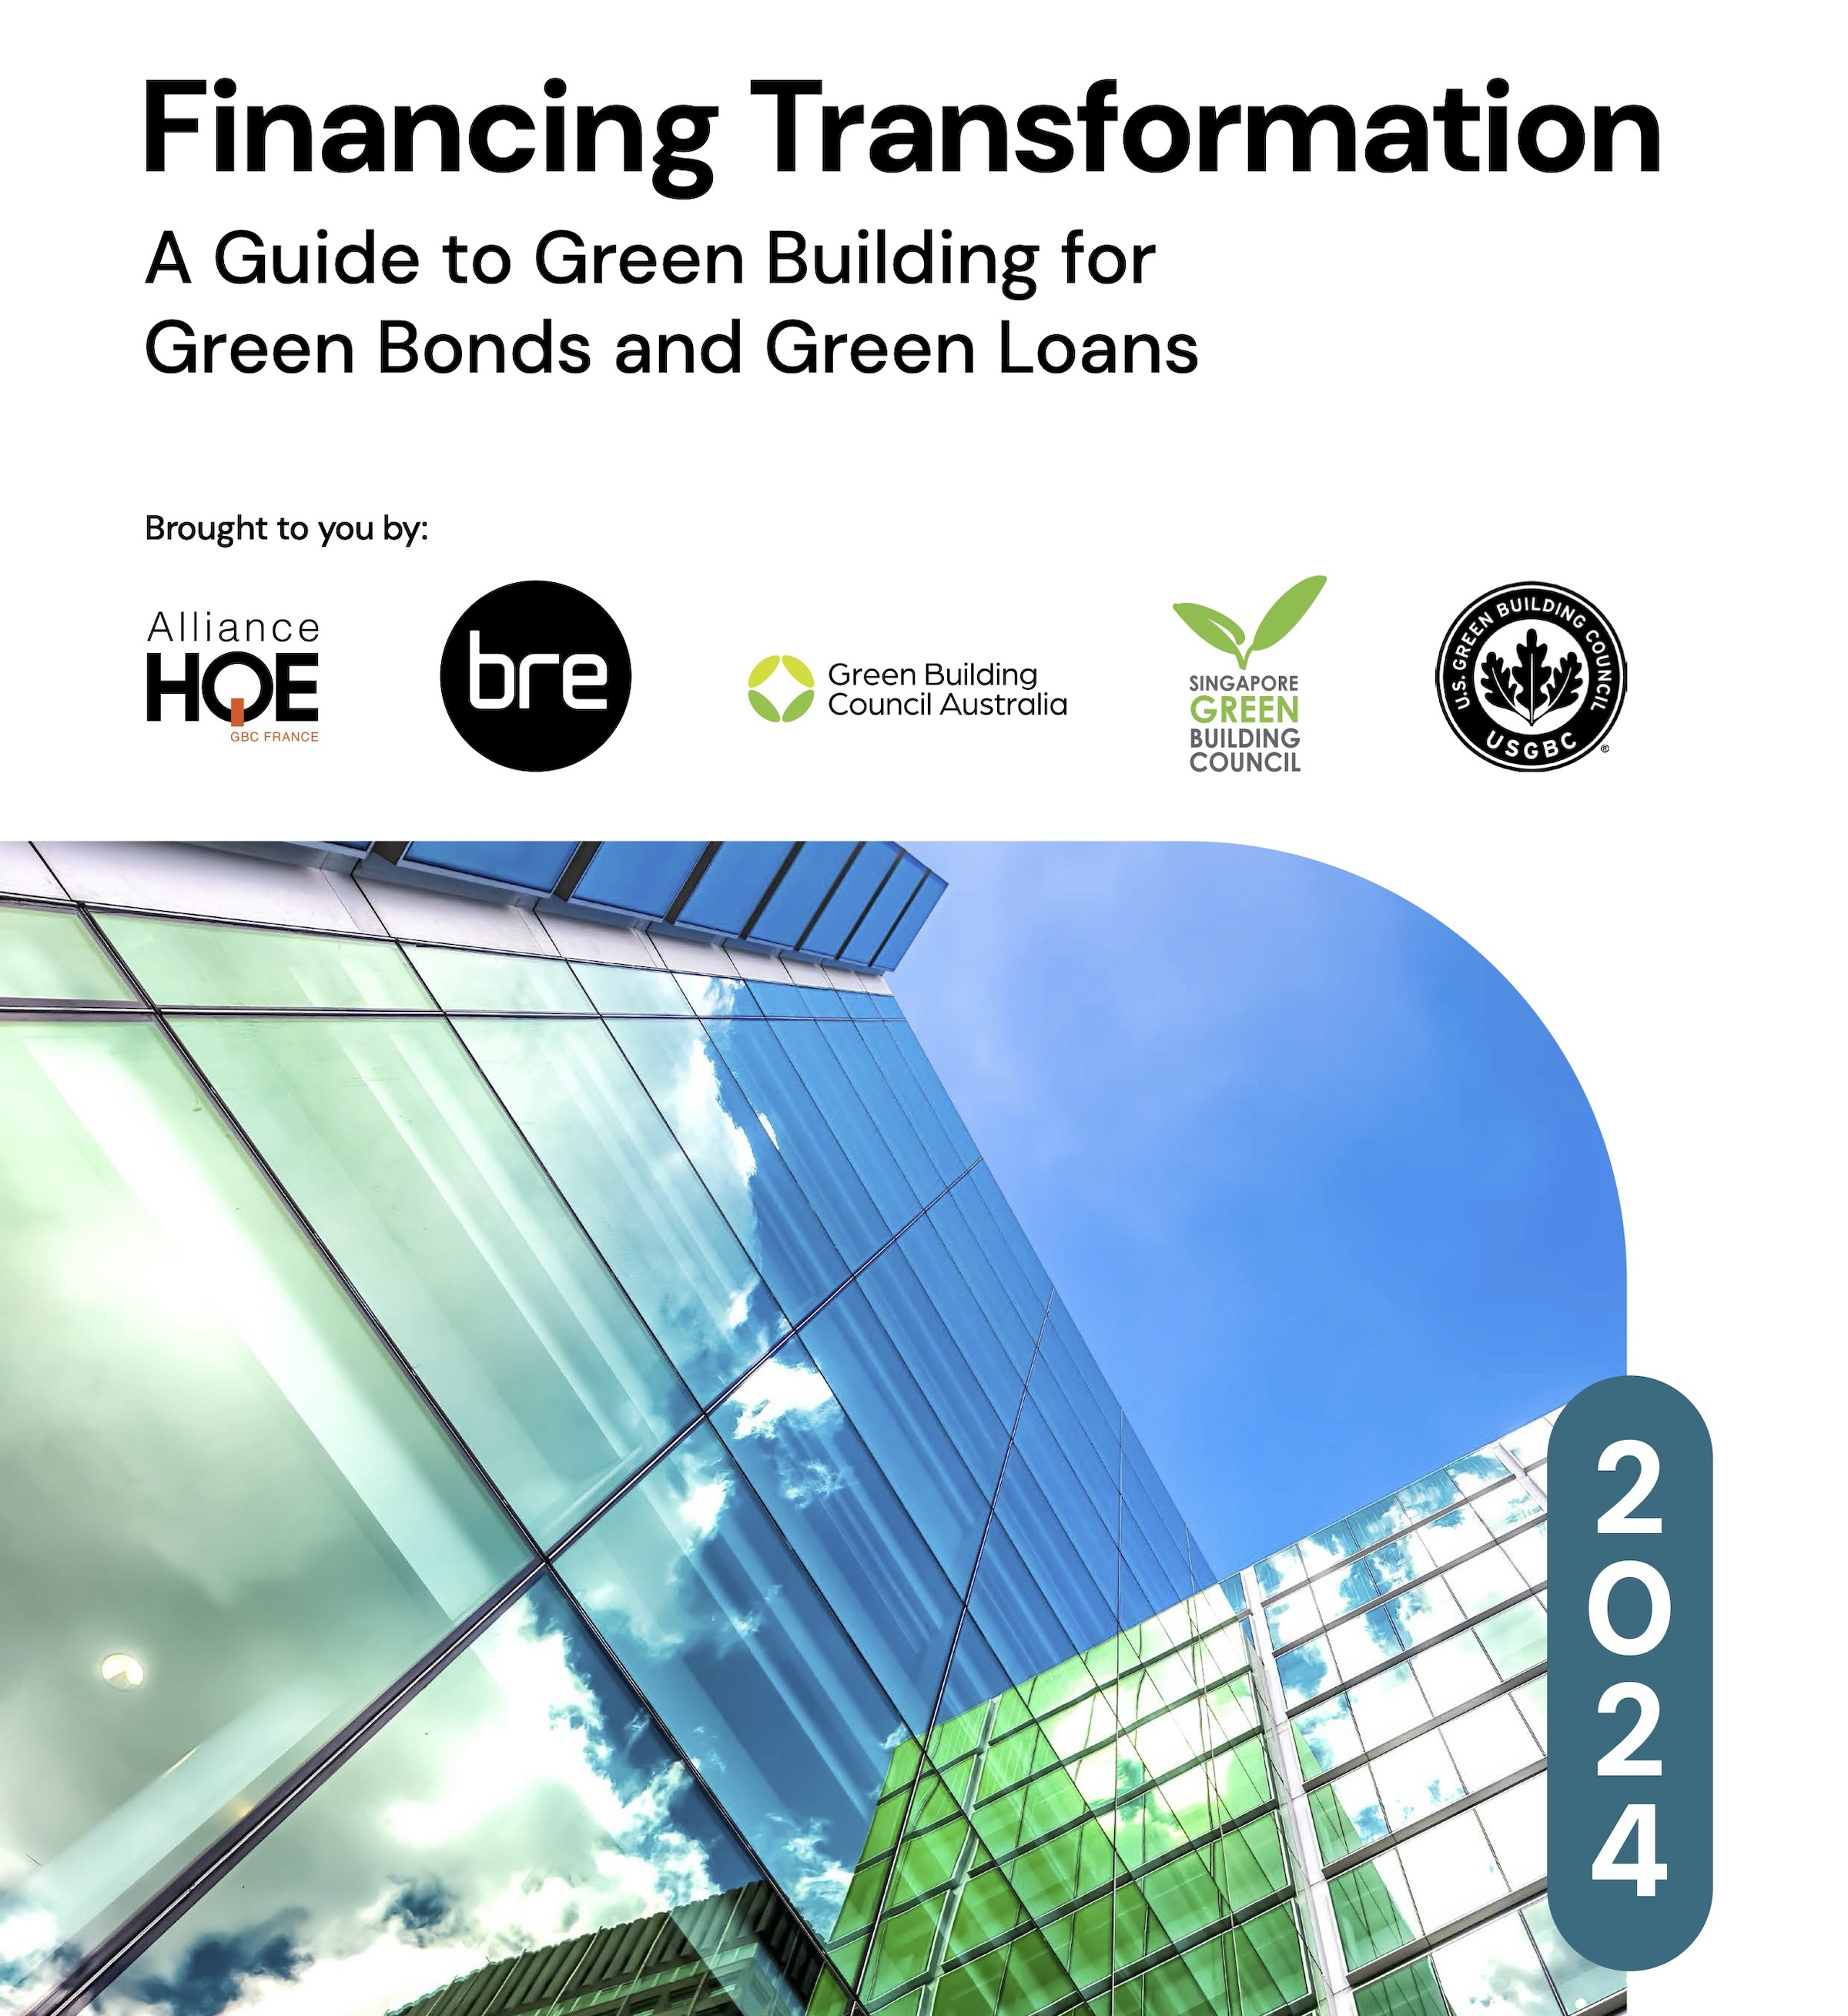 Global green building alliance releases guide for $35 trillion investment to achieve net zero, meet global energy transition goals